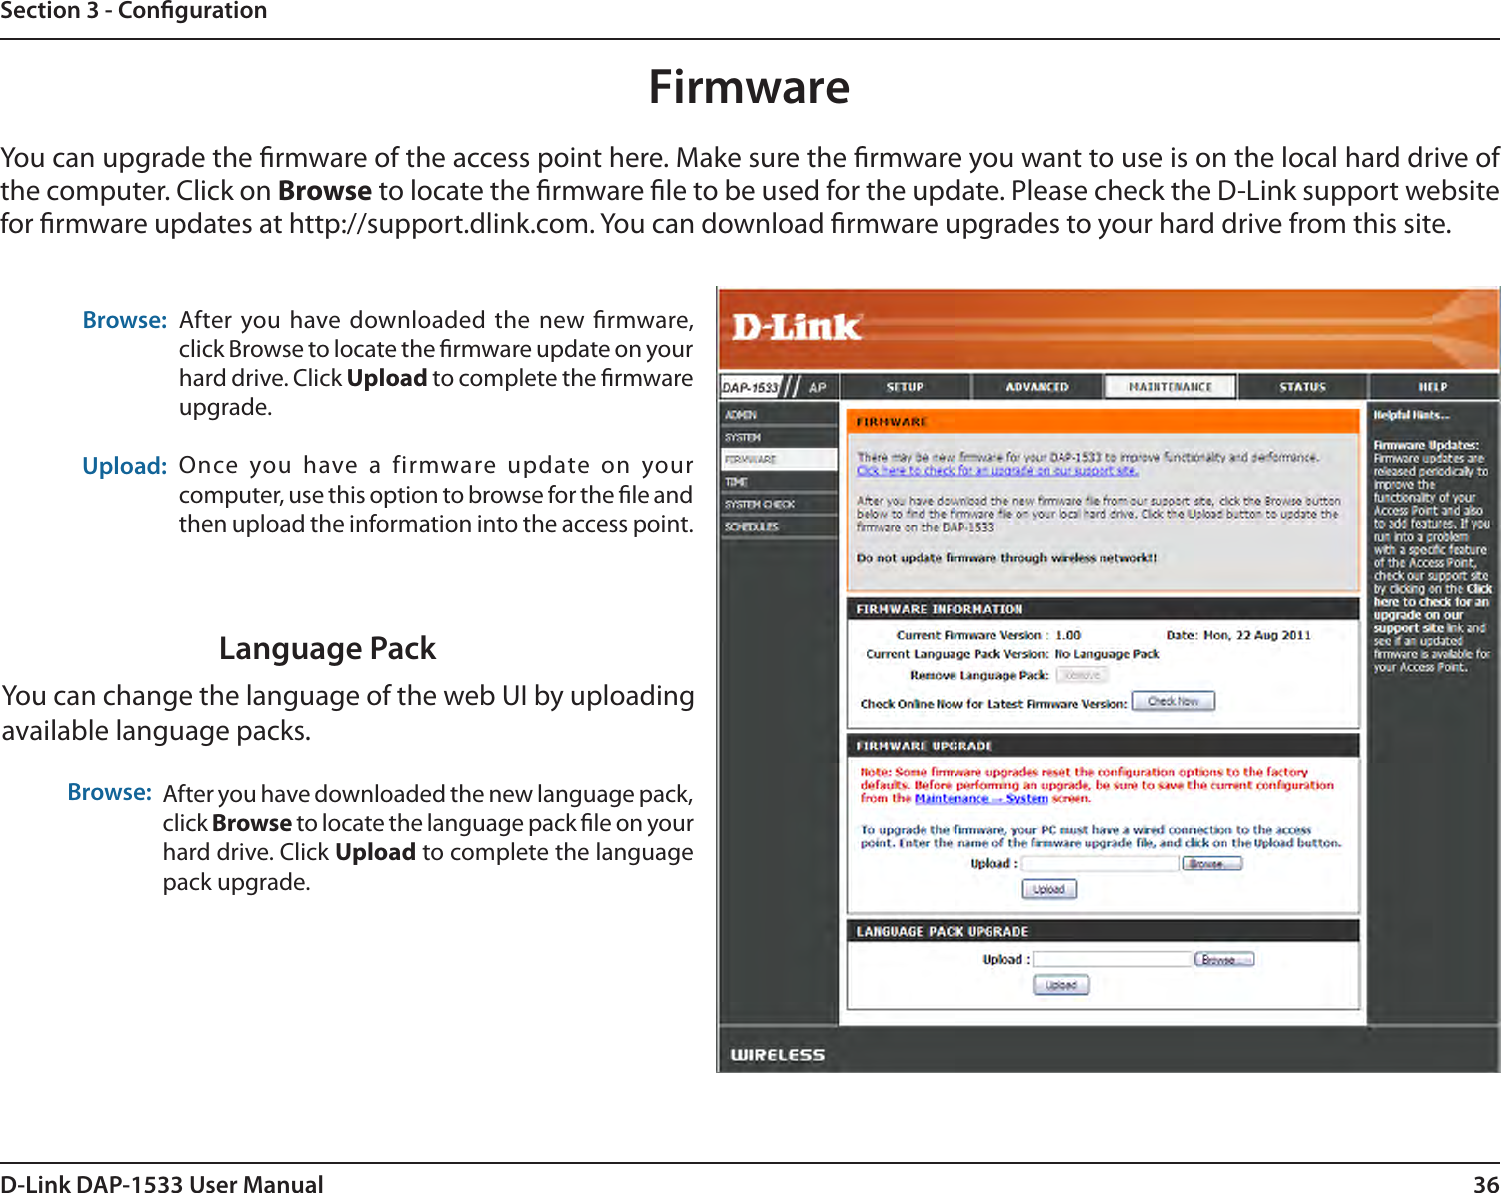 36D-Link DAP-1533 User ManualSection 3 - CongurationBrowse:Upload:After you have downloaded  the  new rmware, click Browse to locate the rmware update on your hard drive. Click Upload to complete the rmware upgrade.Once  you  have  a  firmware  update  on  your computer, use this option to browse for the le and then upload the information into the access point. FirmwareYou can upgrade the rmware of the access point here. Make sure the rmware you want to use is on the local hard drive of the computer. Click on Browse to locate the rmware le to be used for the update. Please check the D-Link support website for rmware updates at http://support.dlink.com. You can download rmware upgrades to your hard drive from this site.After you have downloaded the new language pack, click Browse to locate the language pack le on your hard drive. Click Upload to complete the language pack upgrade.Language PackYou can change the language of the web UI by uploading available language packs.Browse: